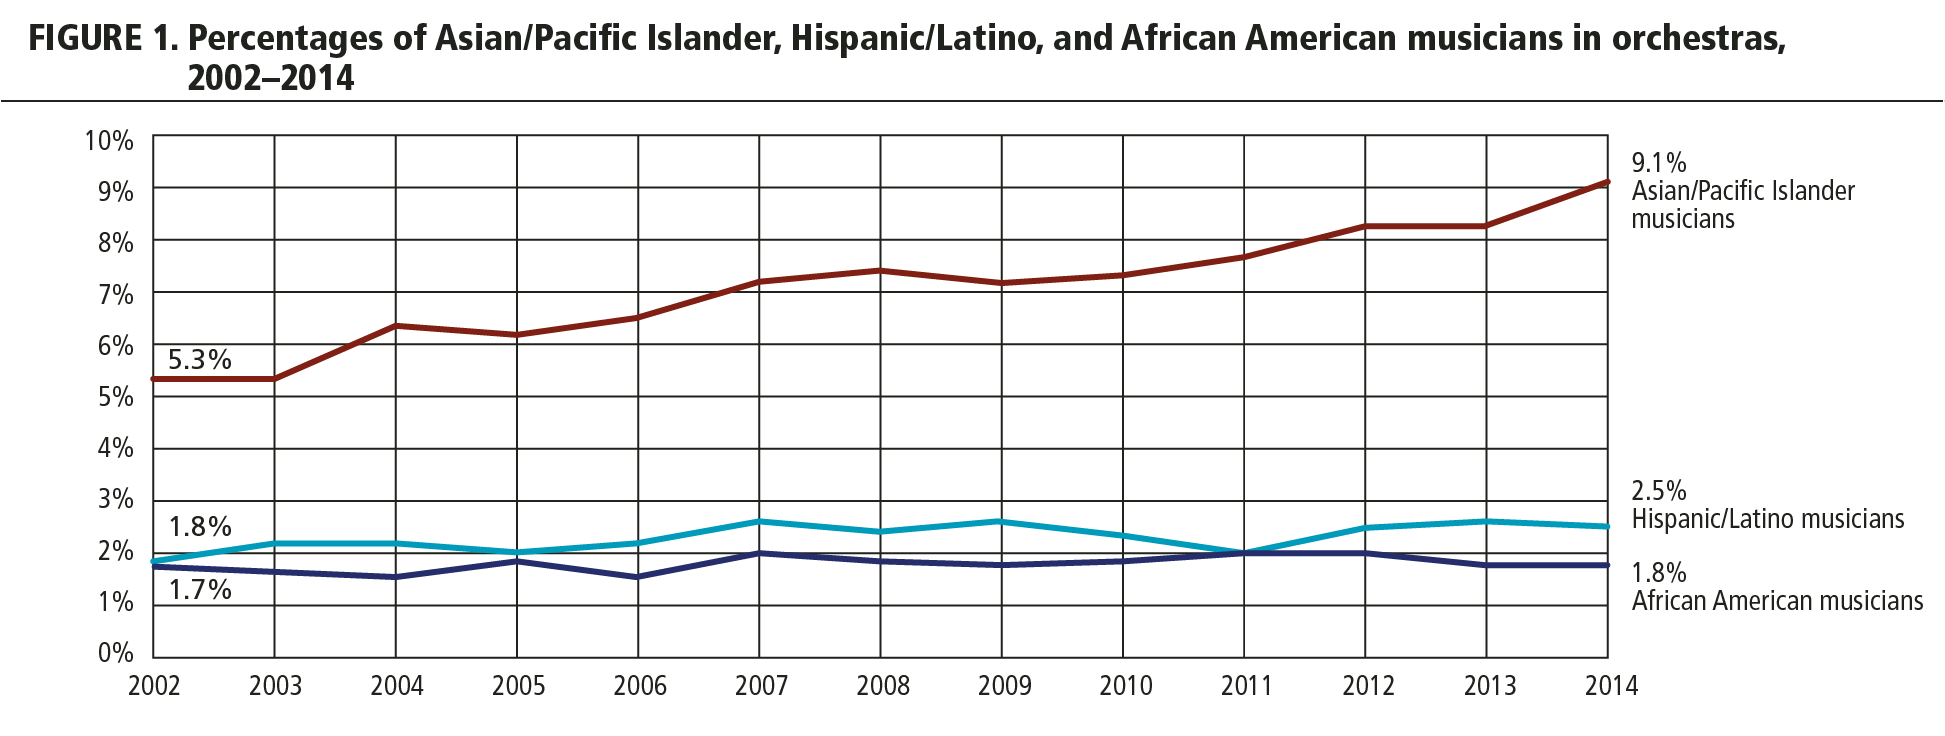 FIGURE 1. Percentage of Asian/Pacific Islander, Hispanic/Latino, and African American musicians in orchestras, 2002-2014